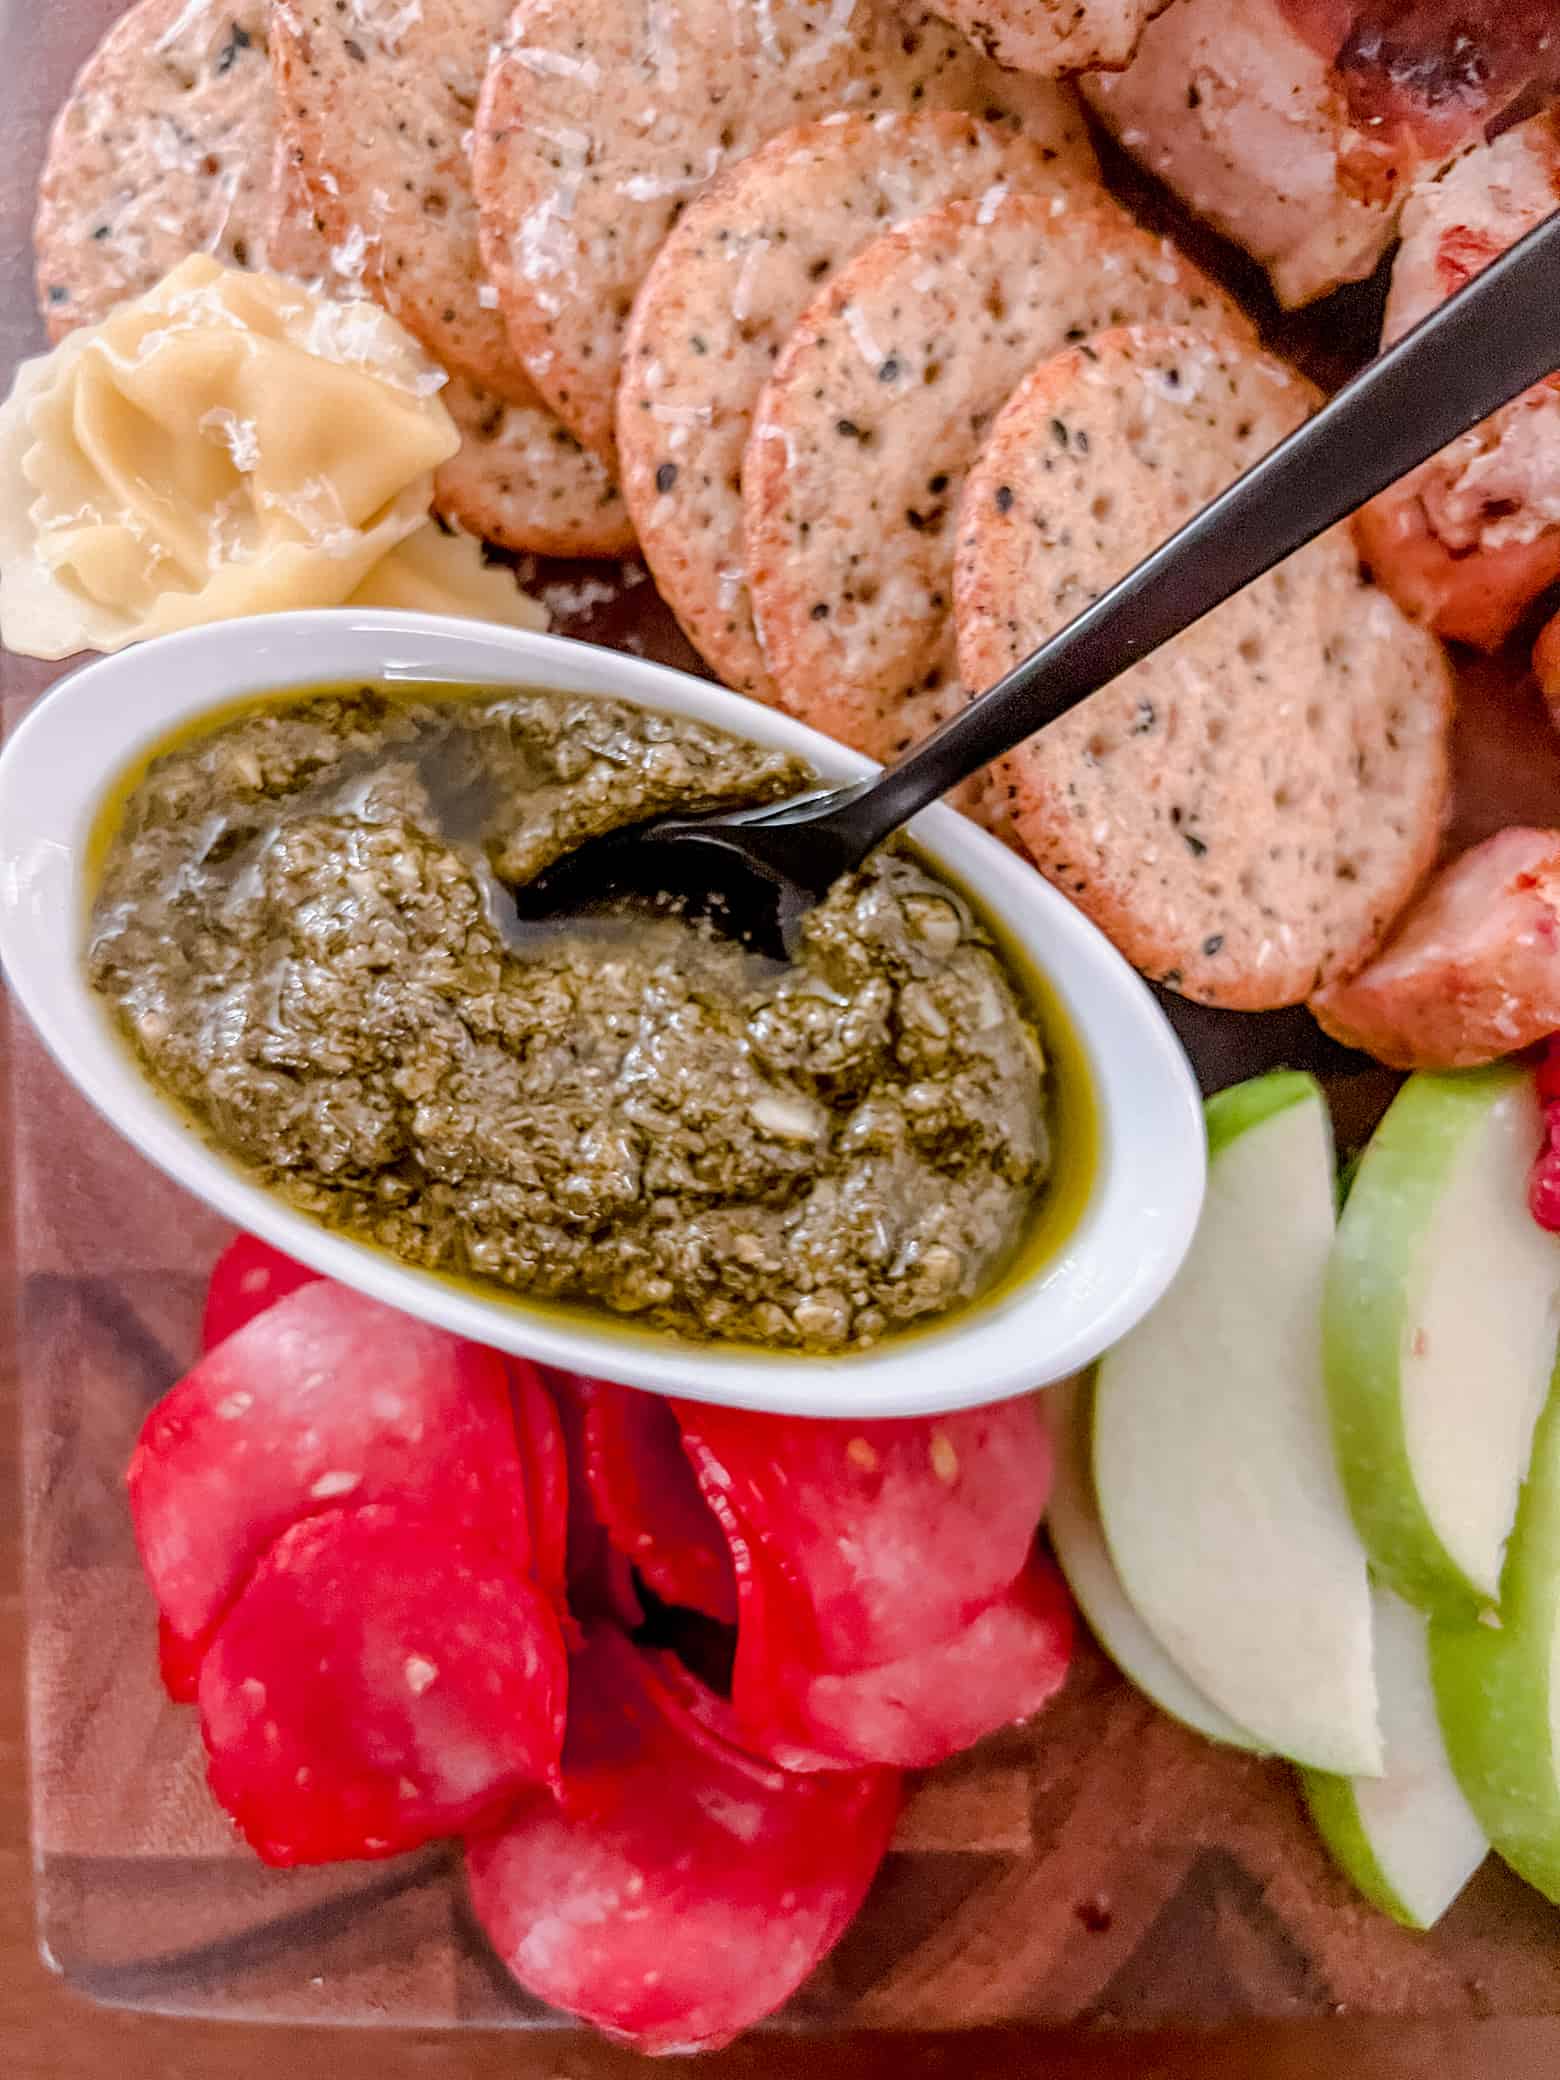 Extreme close up of a charcuterie board with a bowl of pesto with a spoon in it and various food items